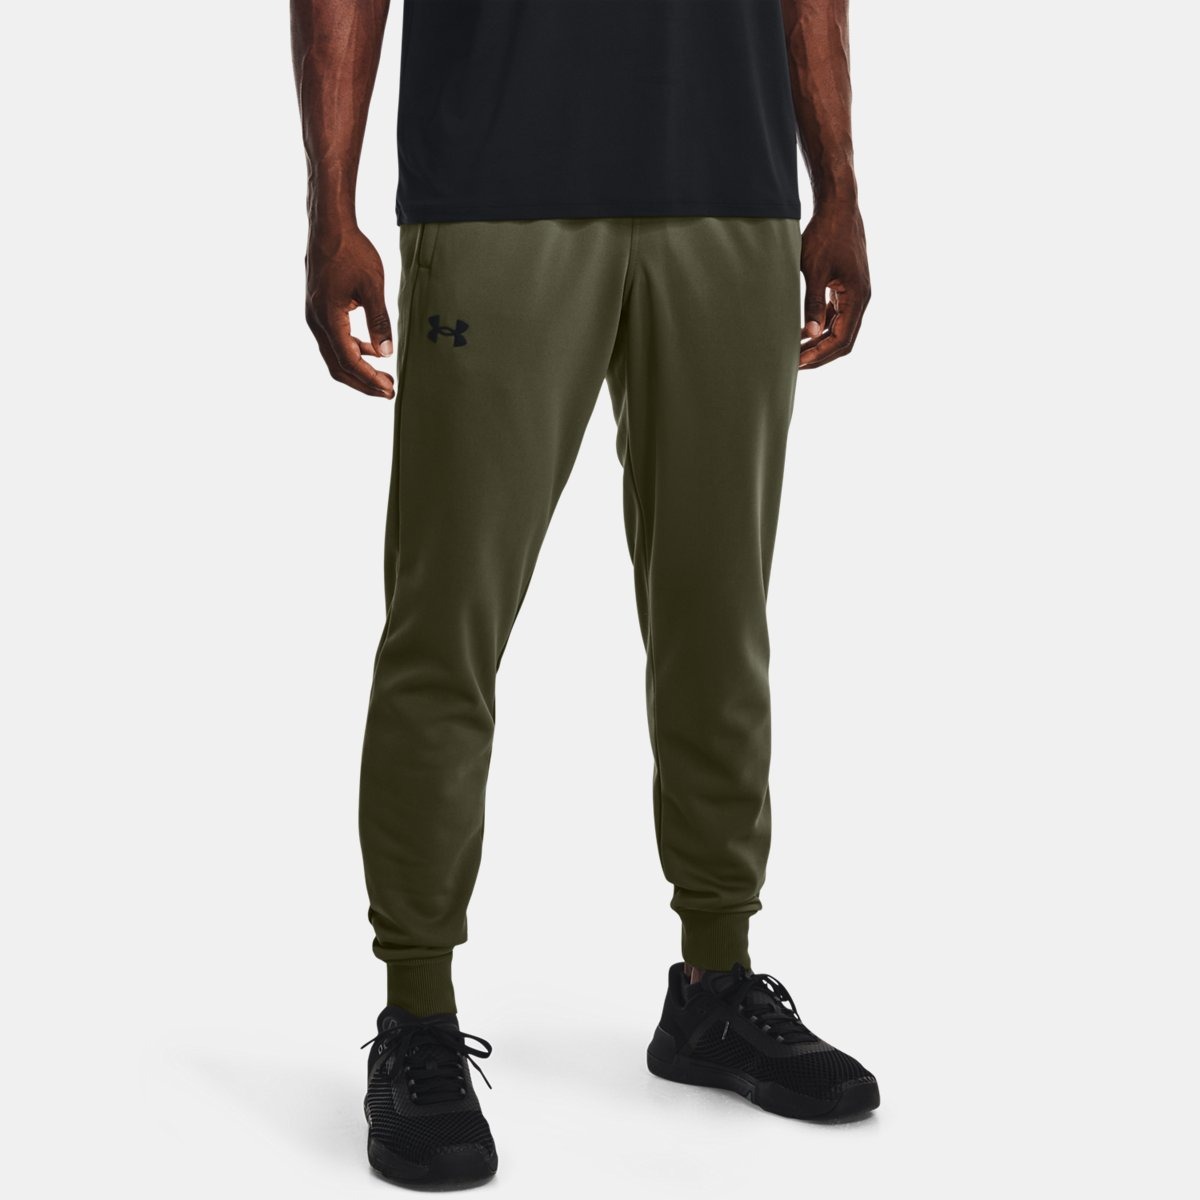 Gent Green Joggers from Under Armour GOOFASH